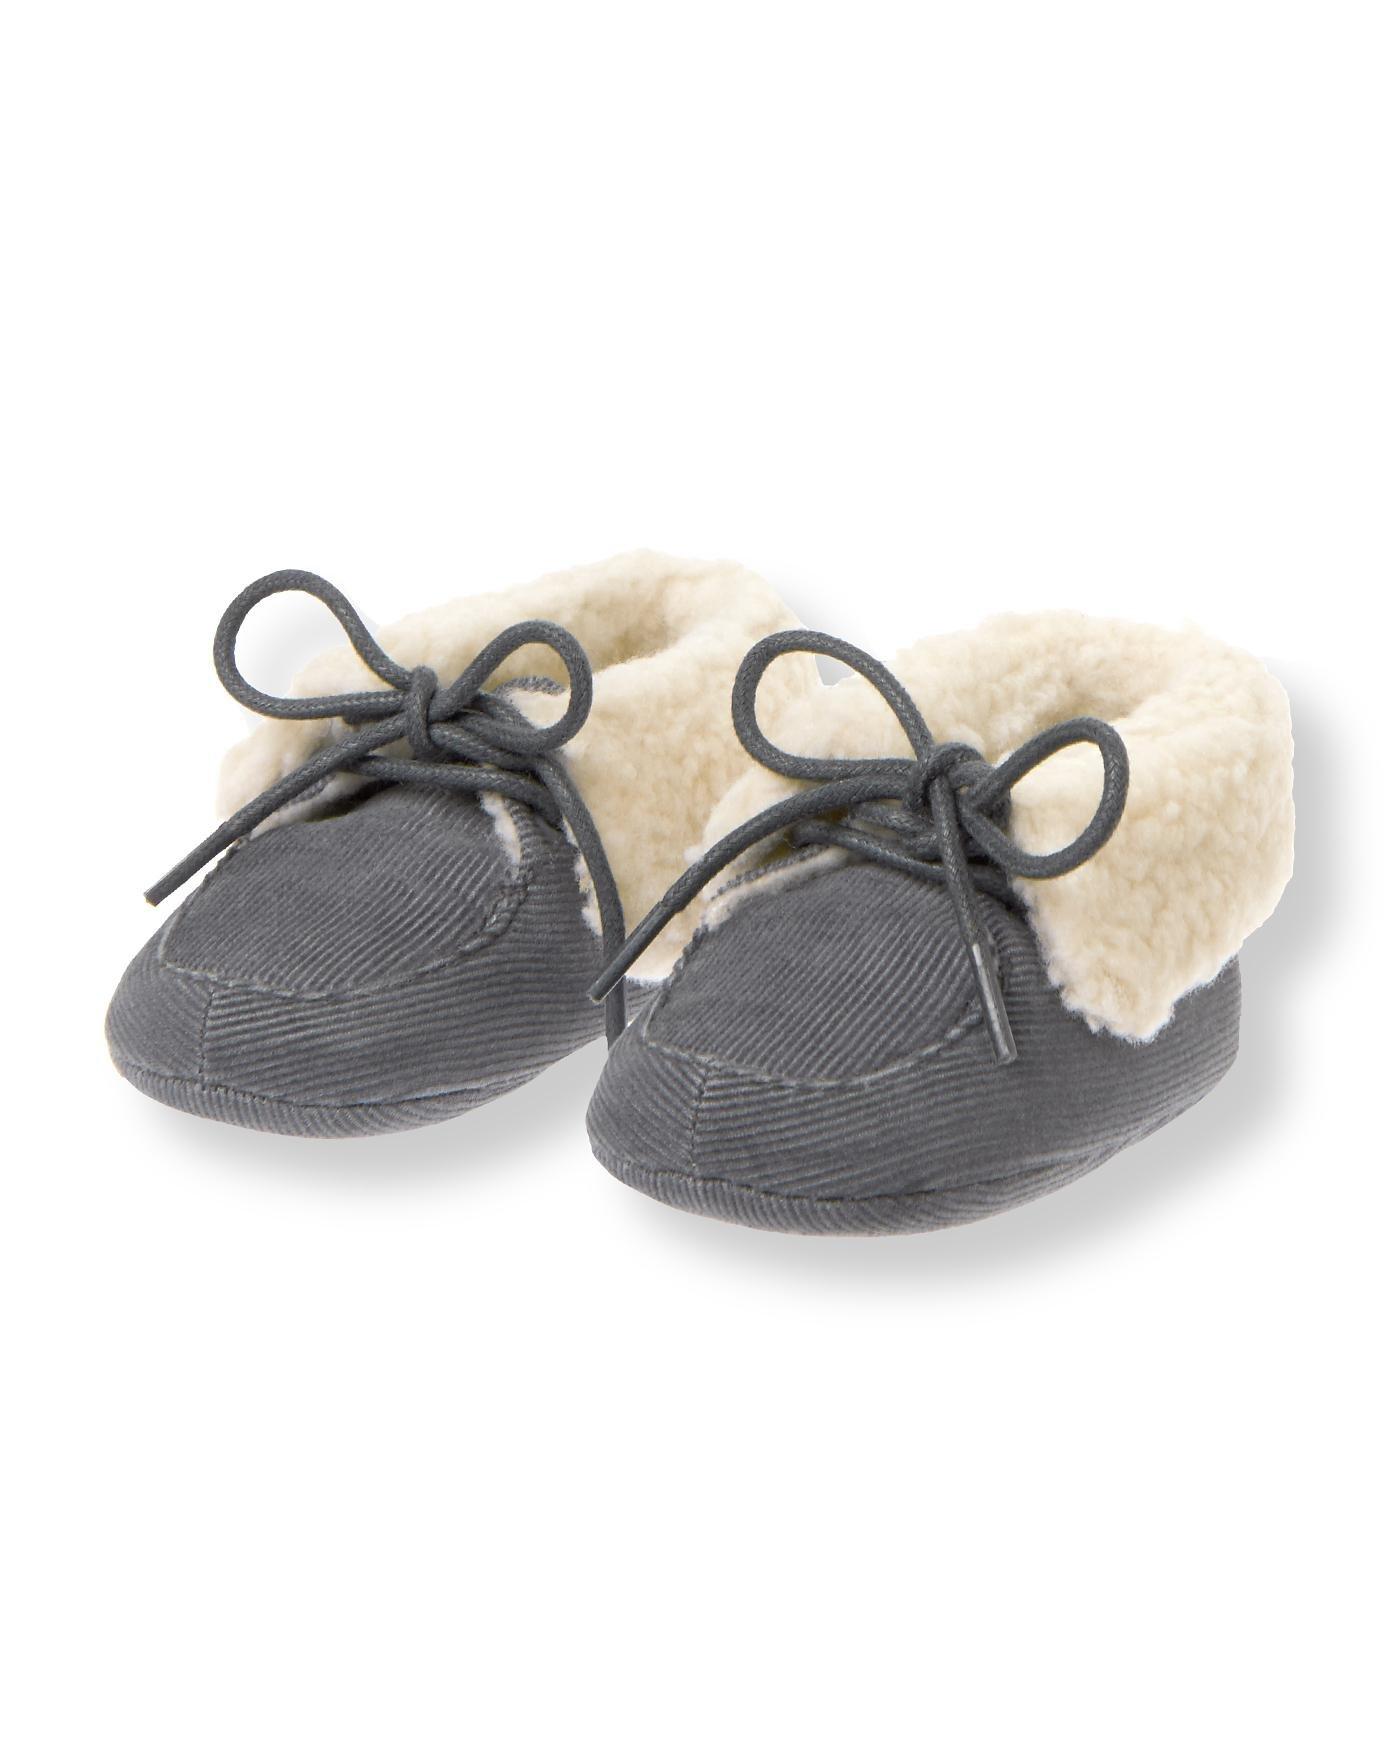 Sherpa Lined Crib Shoe image number 0